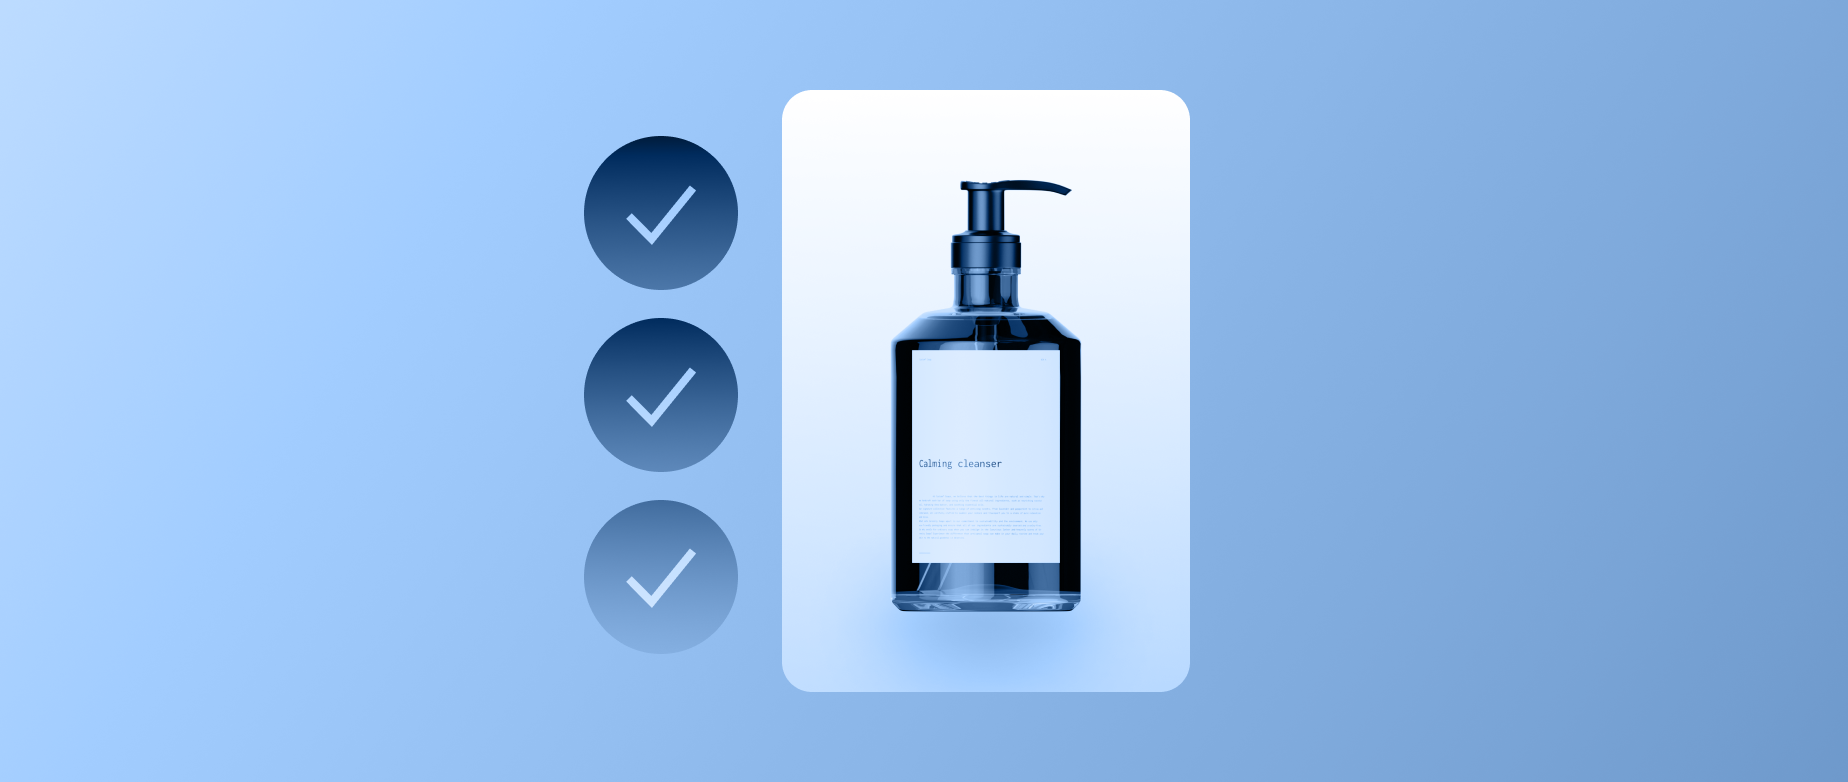 A bottle of calming cleanser next to three check marks on a light blue background.